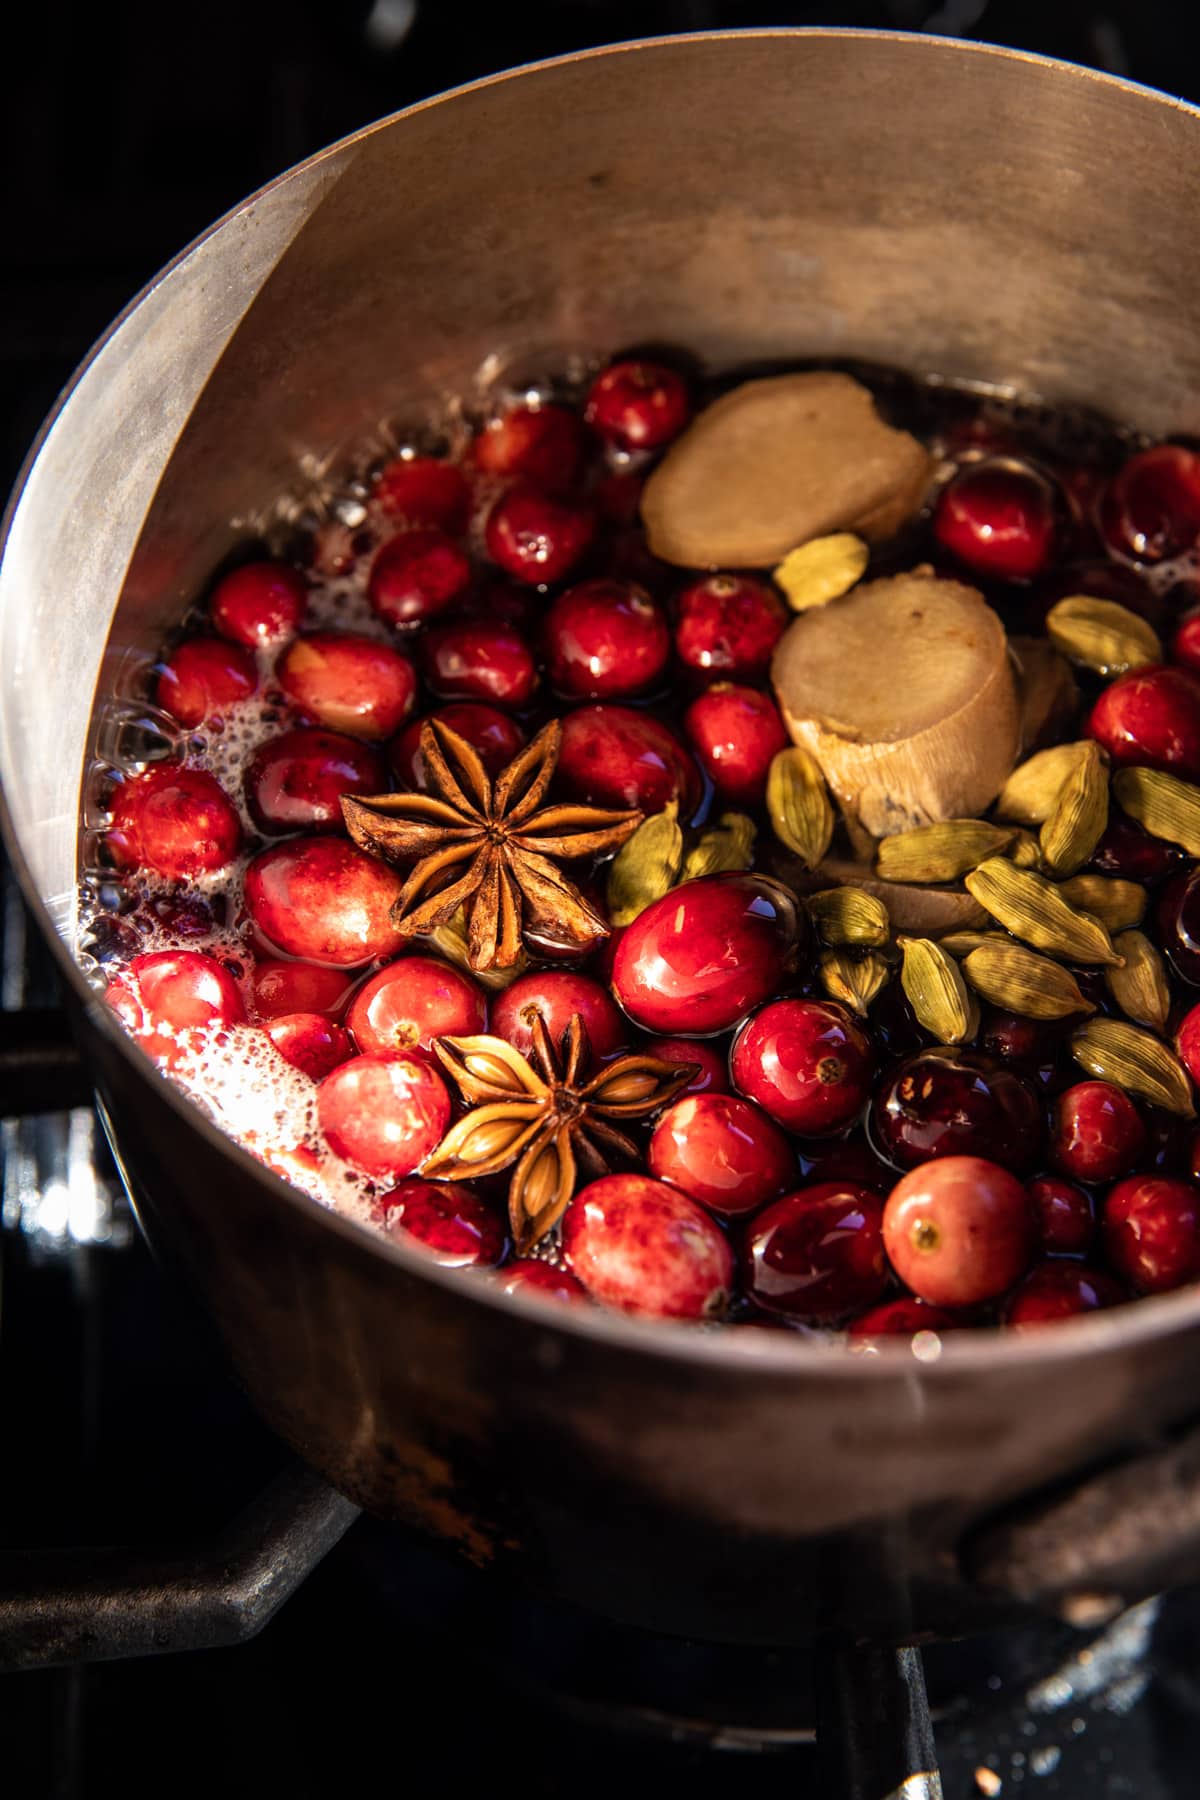 Spiced Cranberry Thyme Moscow Mule | halfbakedharvest.com